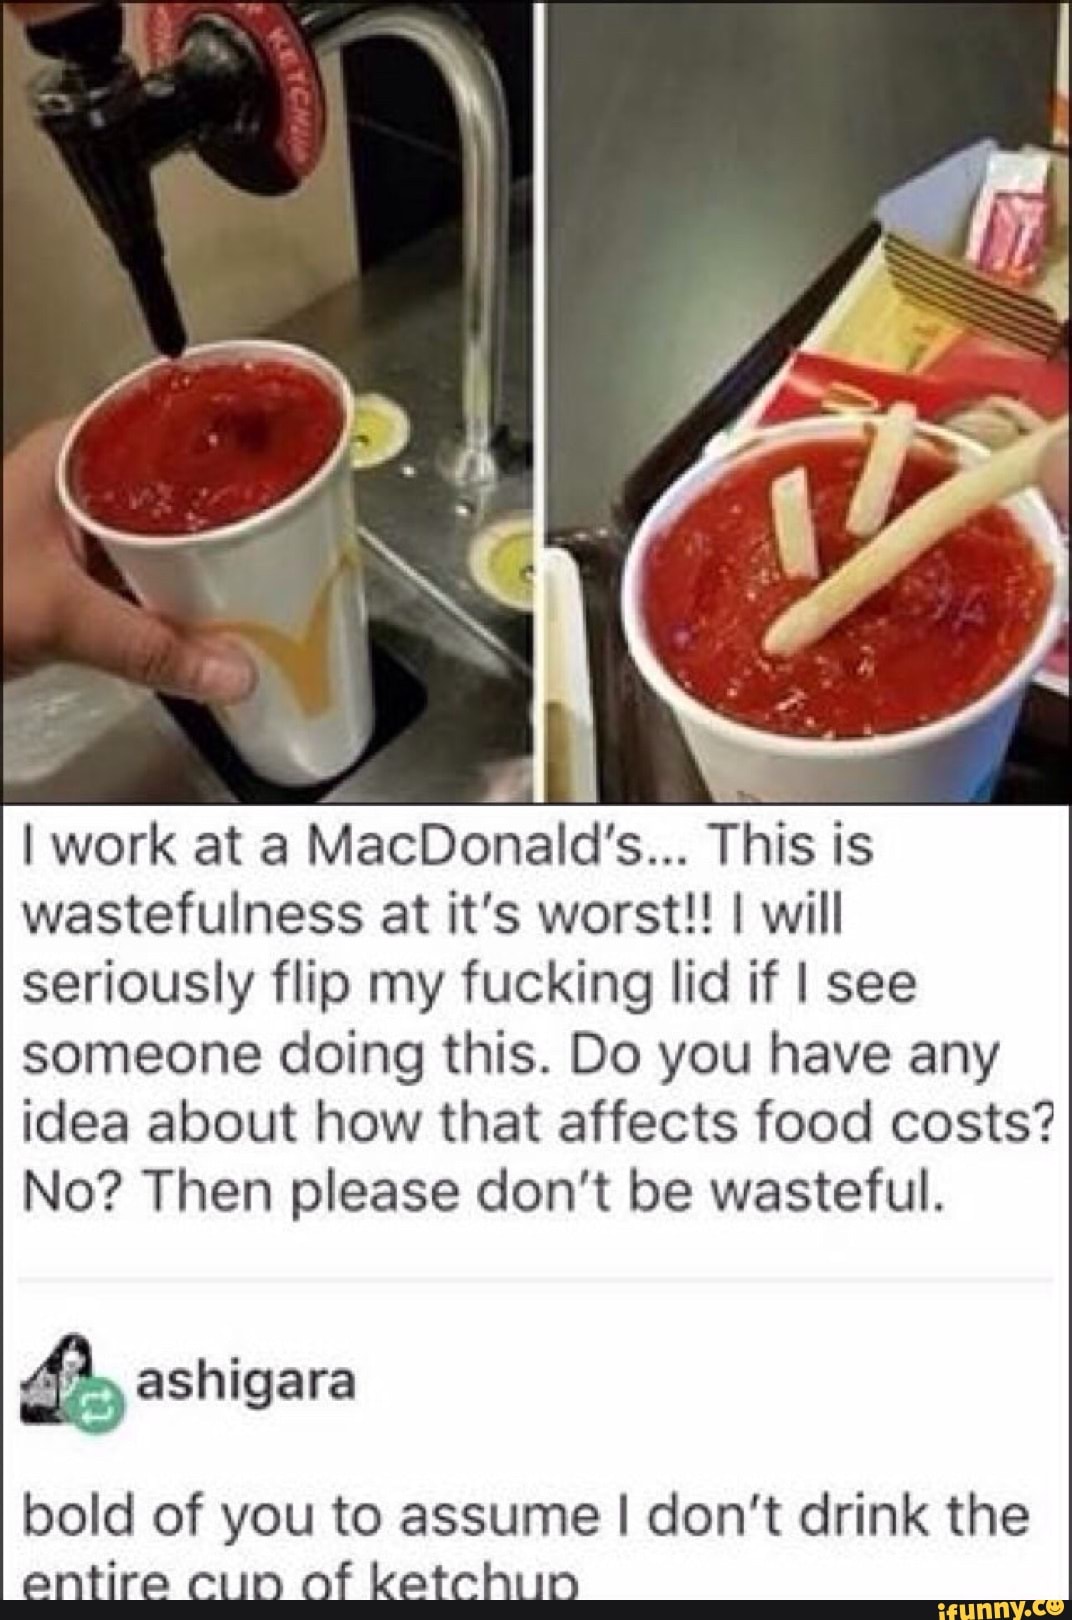 cursed food - I work at a MacDonald's... This is wastefulness at it's worst!! I will seriously flip my fucking lid if I see someone doing this. Do you have any idea about how that affects food costs? No? Then please don't be wasteful. ashigara bold of you